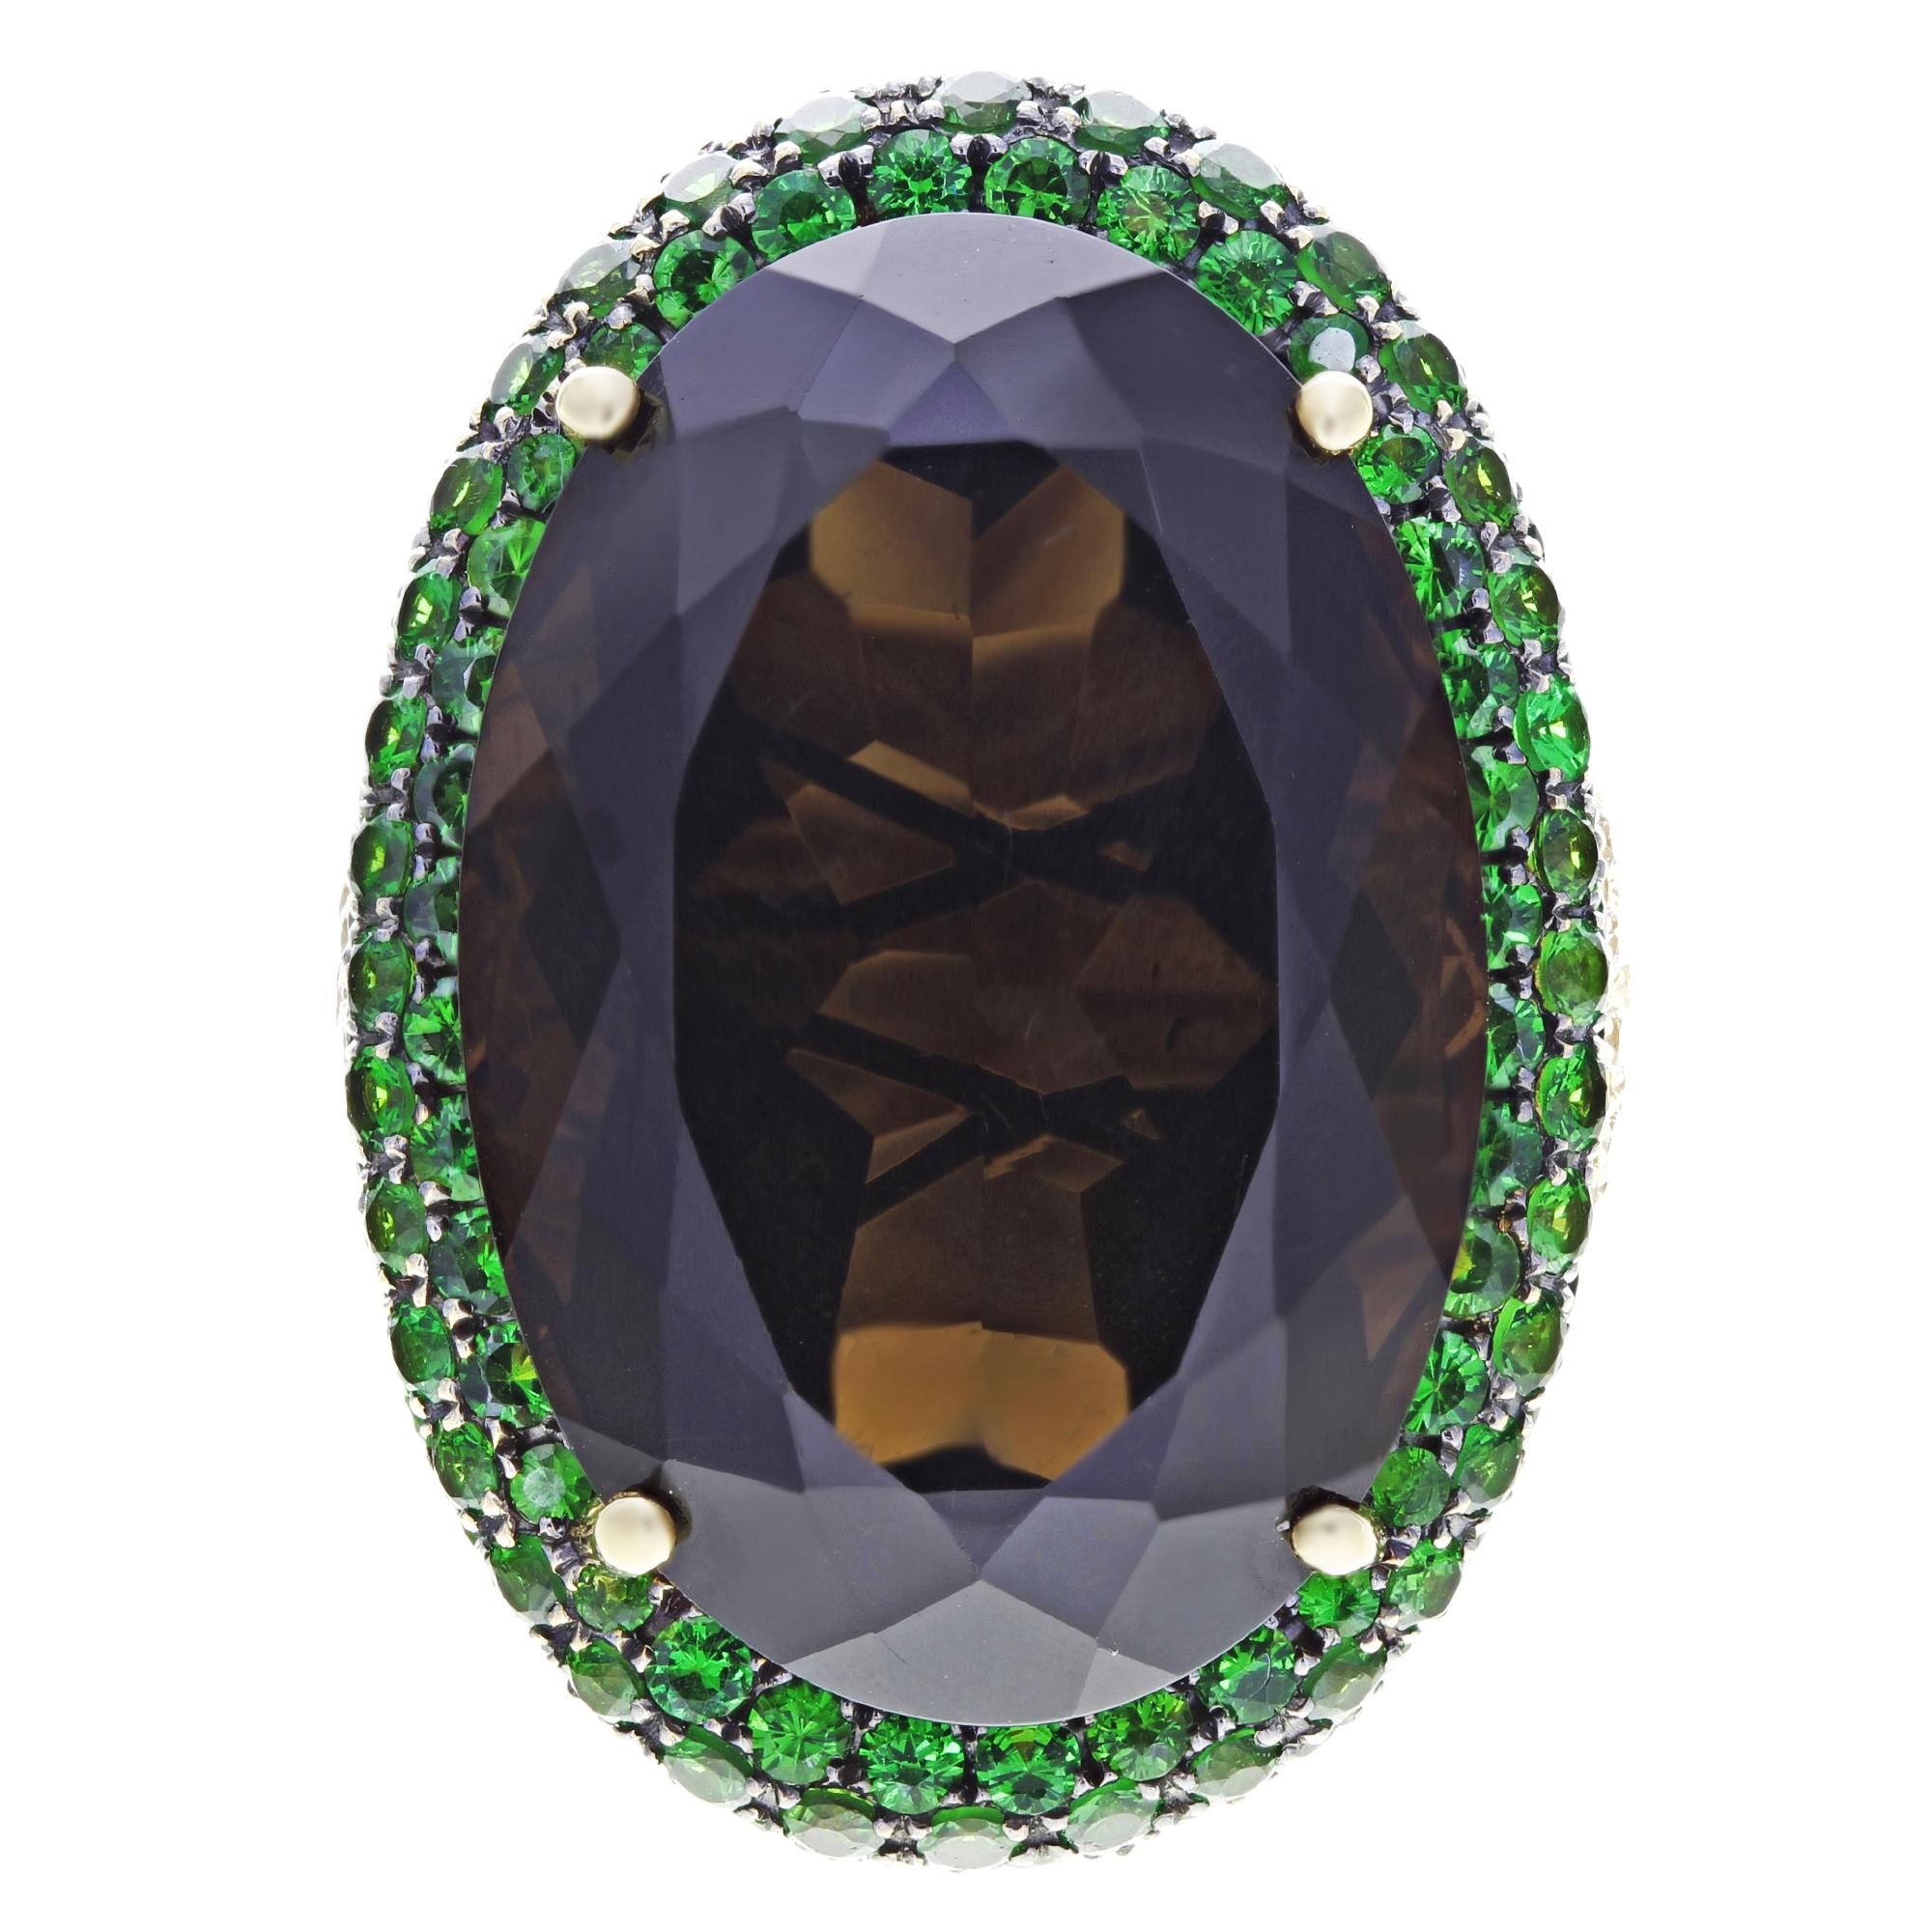 This is a glamorous cocktail ring crafted in 18K carat yellow gold. It features a madeira citrine stone 27 x 19mm, surrounded by sparkly pave diamonds 3.10cts and Green Tsavorites (Garnet) round cuts: 3.24cts. This ring will give you the most